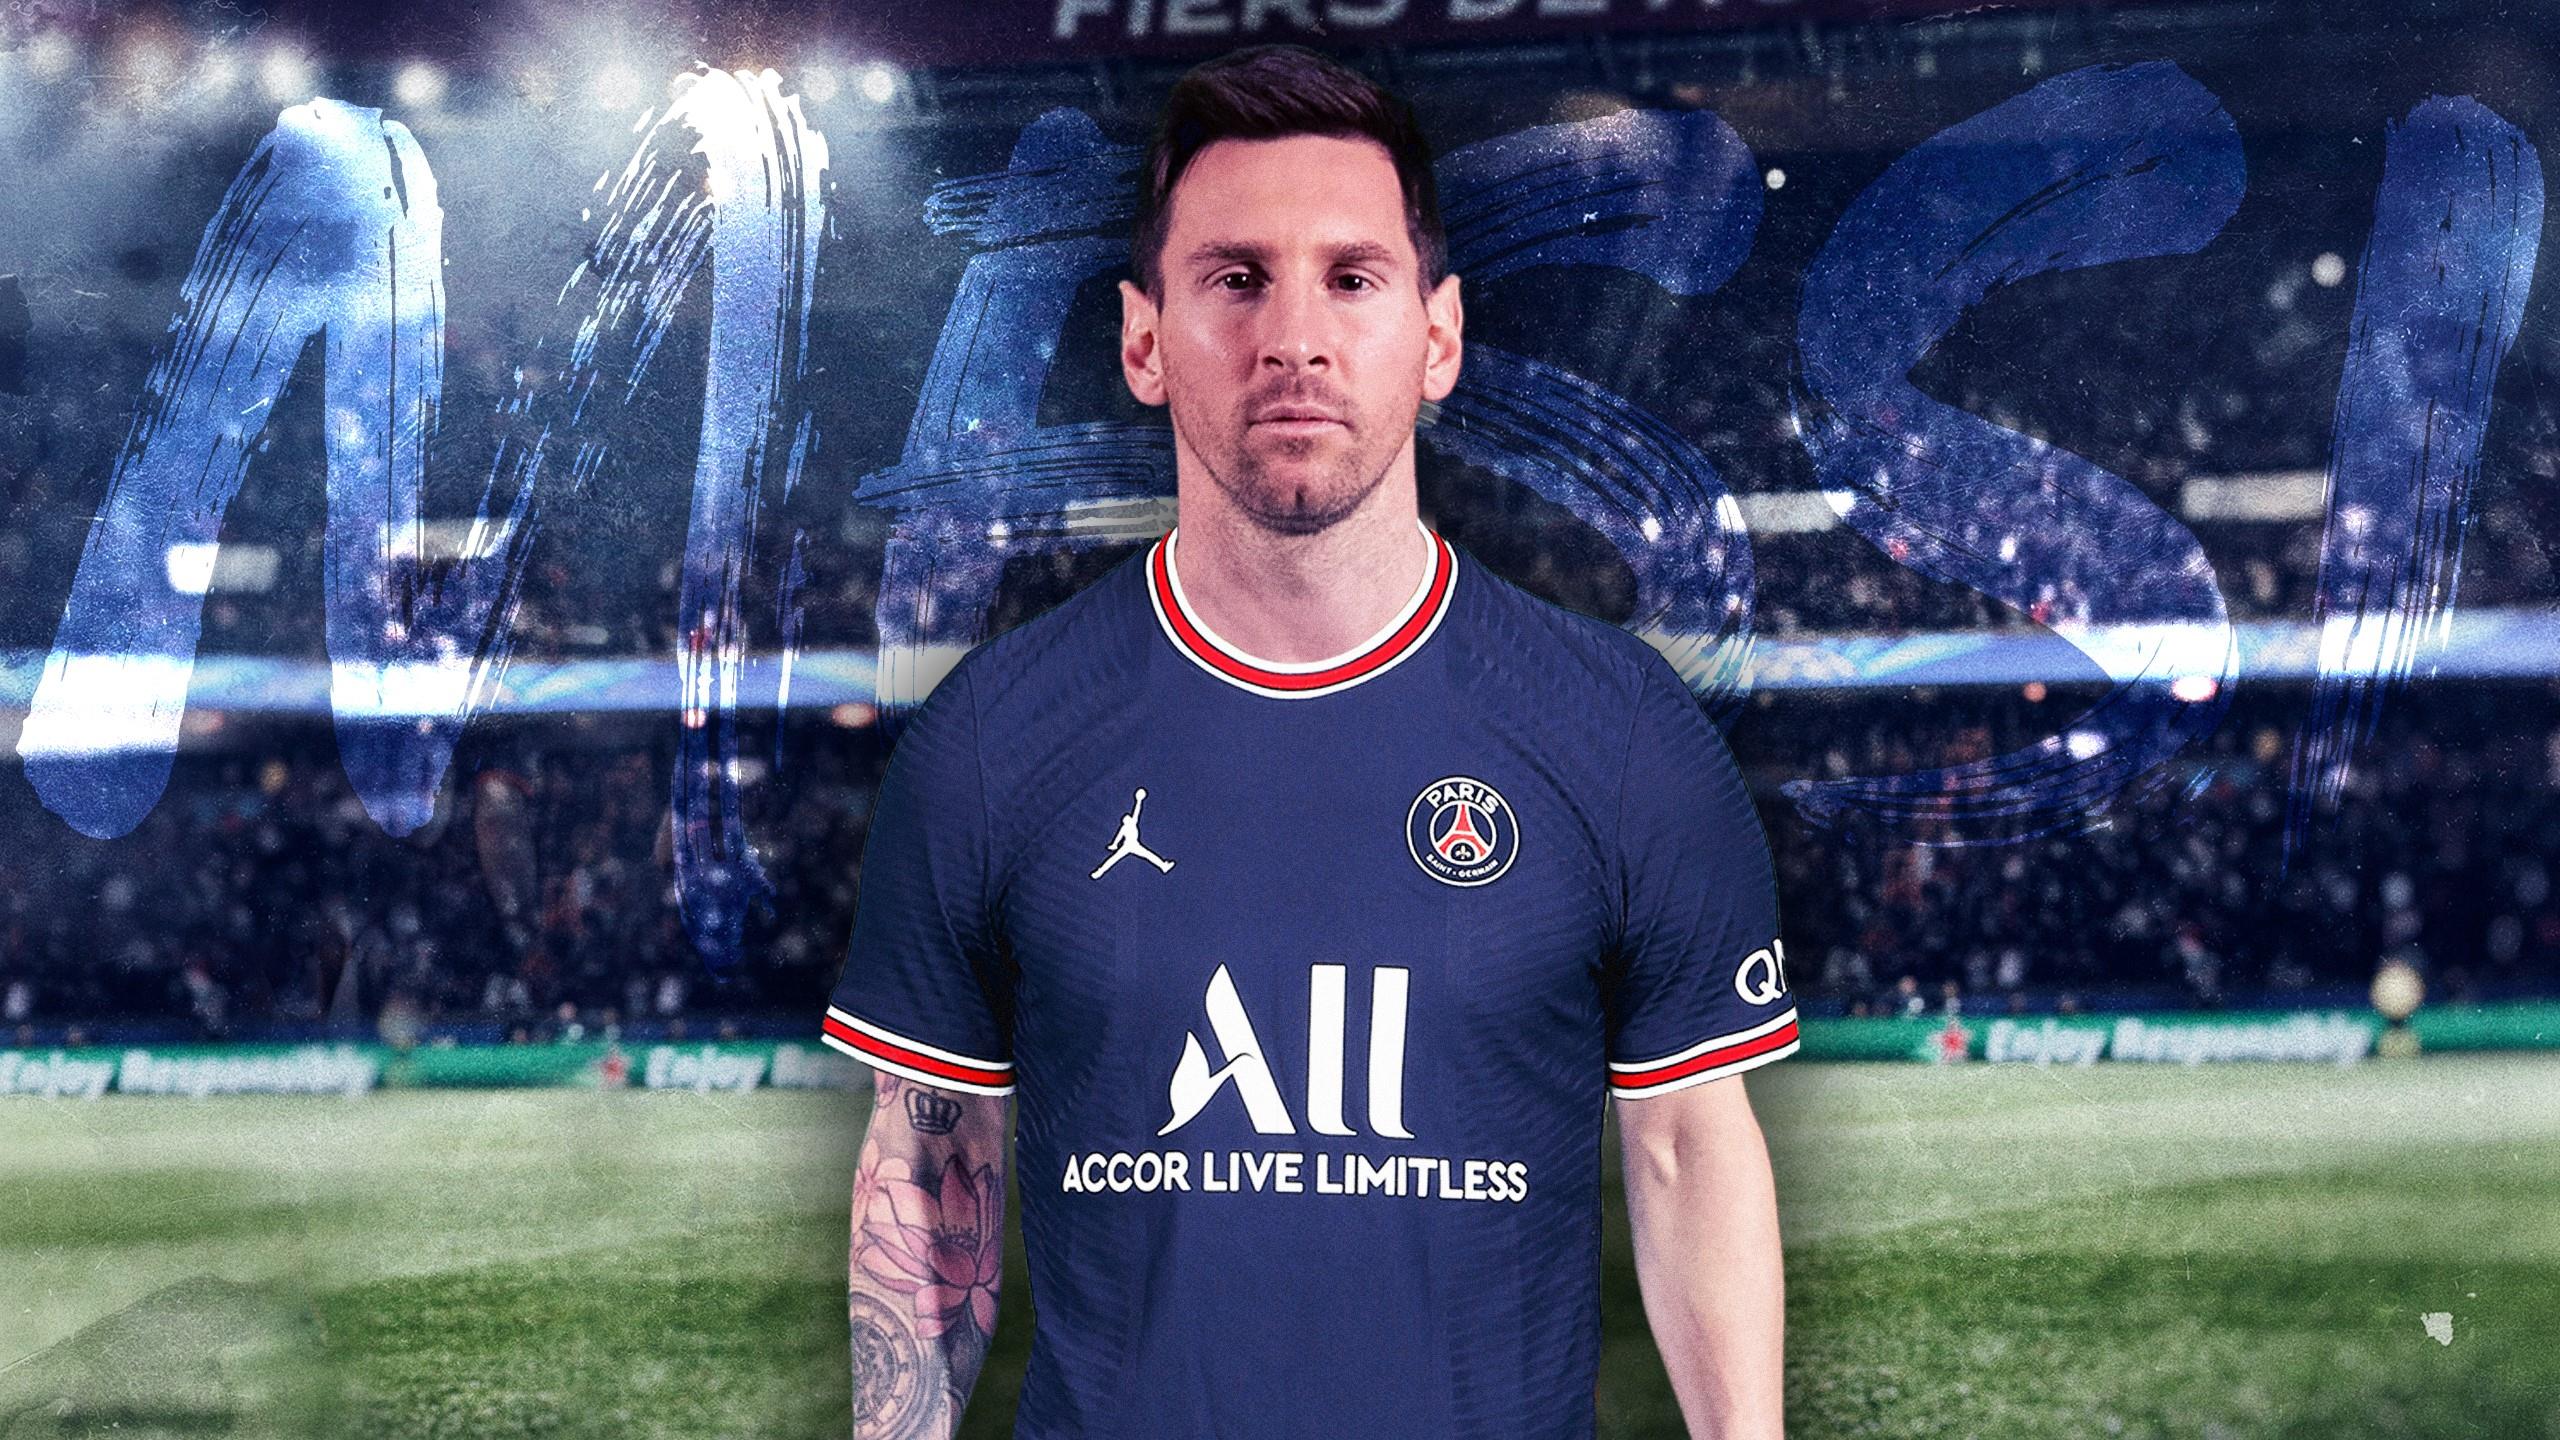 Paris Saint Germain All But Confirm Lionel Messi With Teaser Videos, Set To Join On Free Transfer